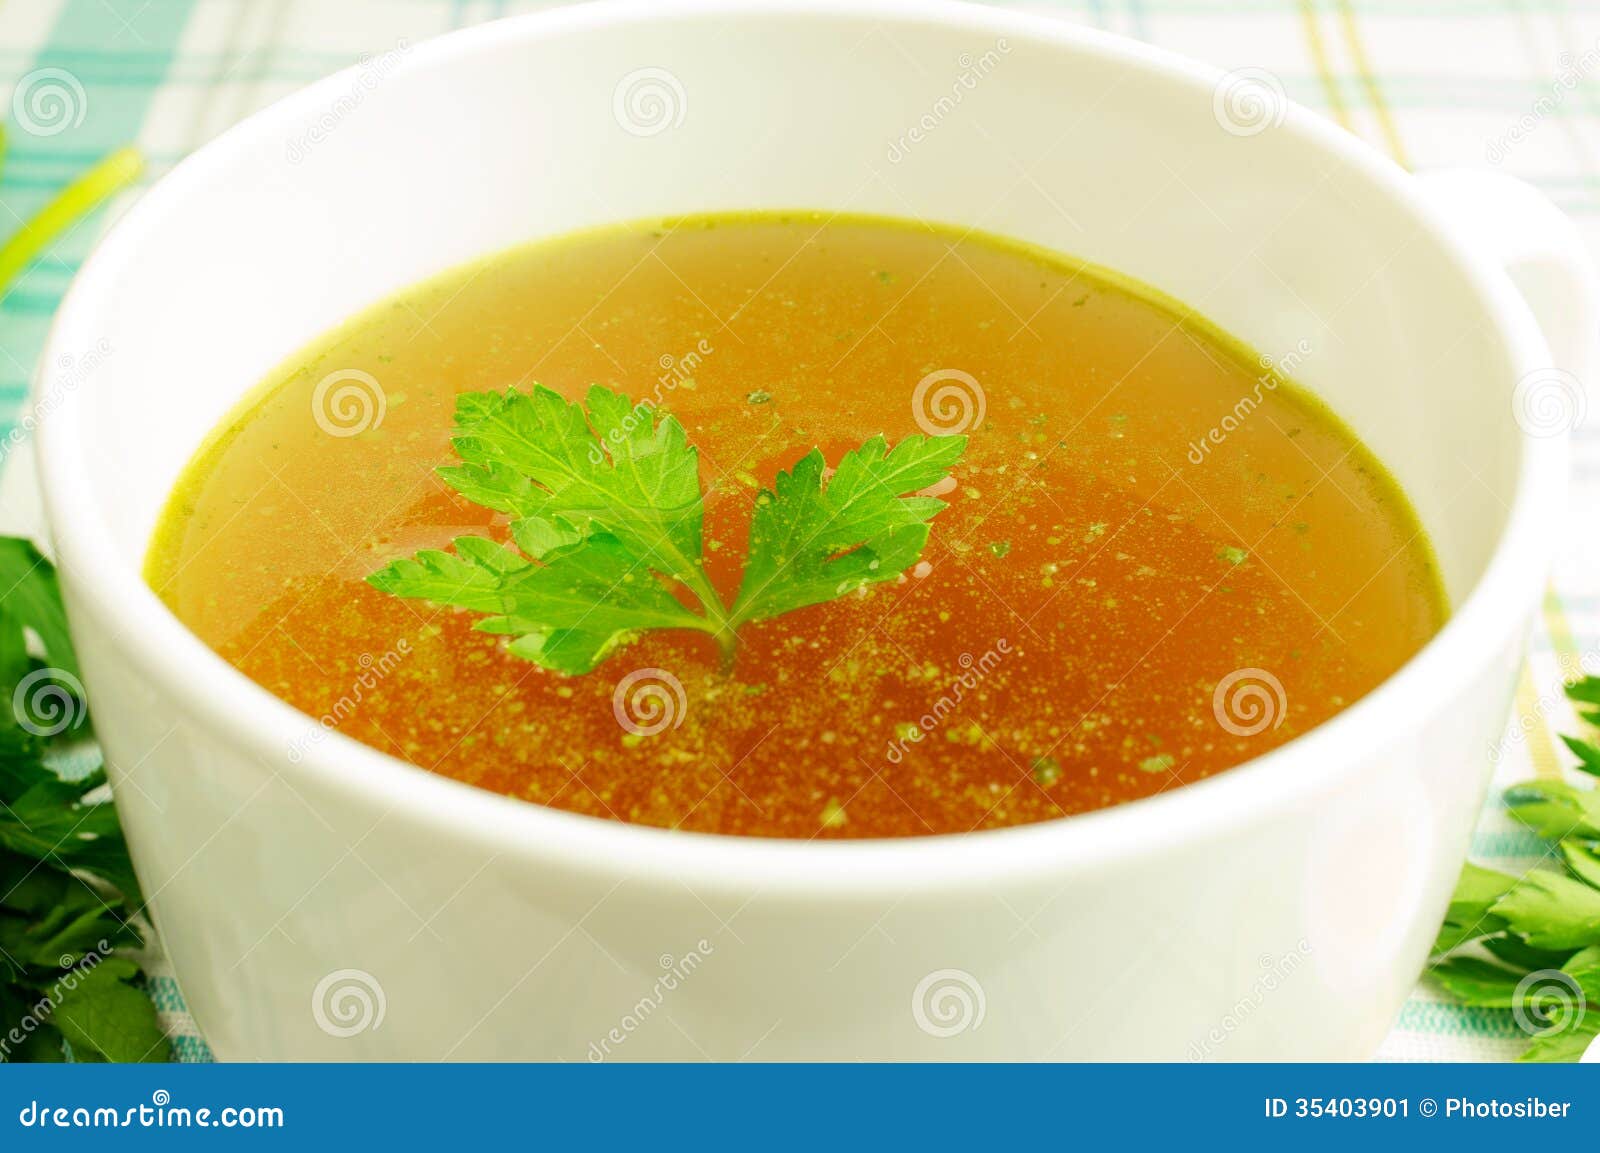 Clear Soup With Pork In White Plate Put On Wooden Background, Stock ...